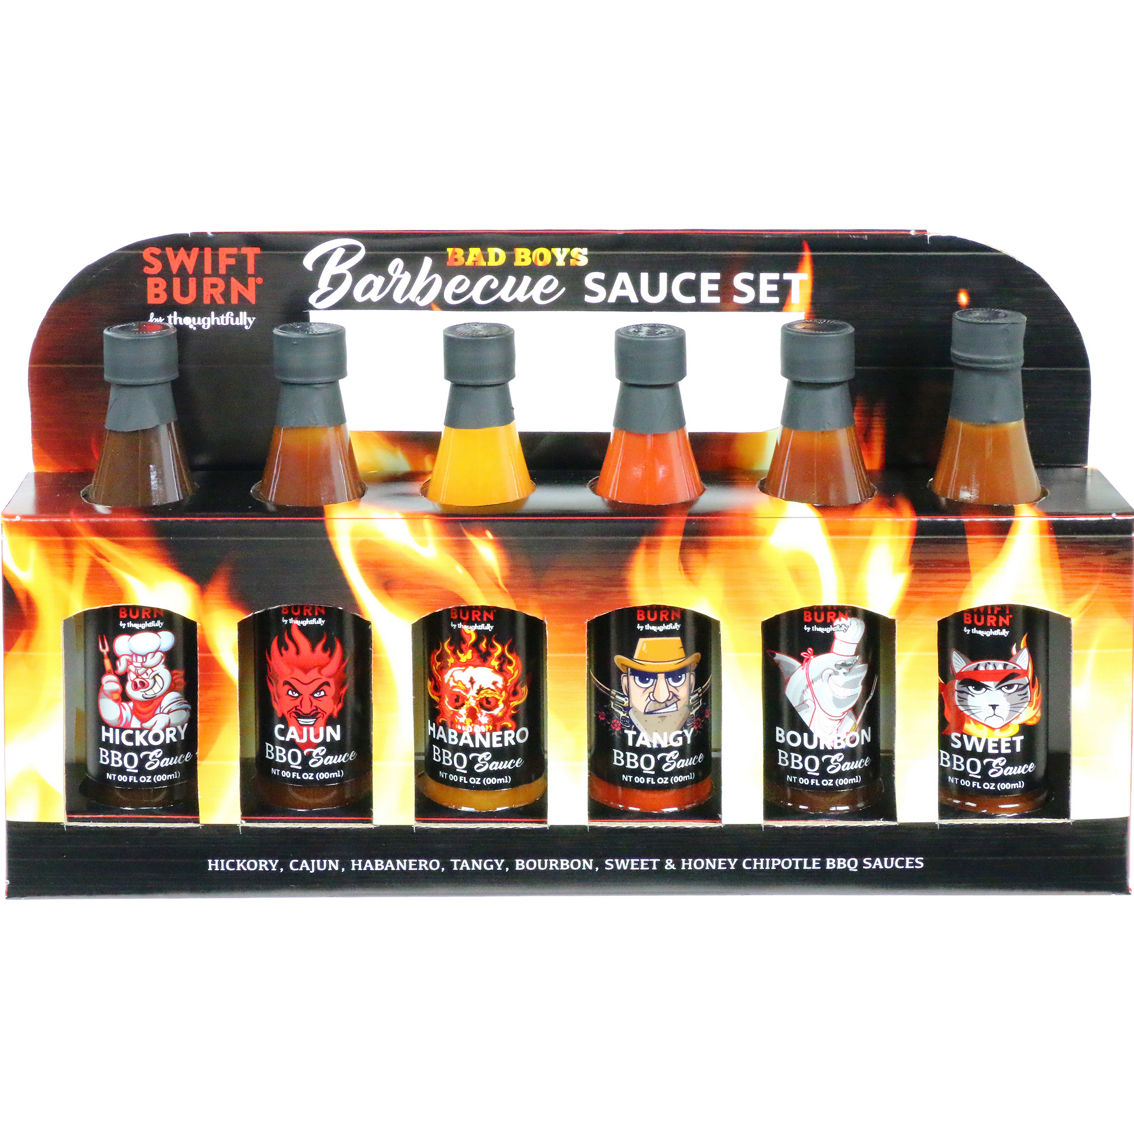 Modern Gourmet Foods Bad Boys Barbecue Sauce 6 pc. Set - Image 1 of 2